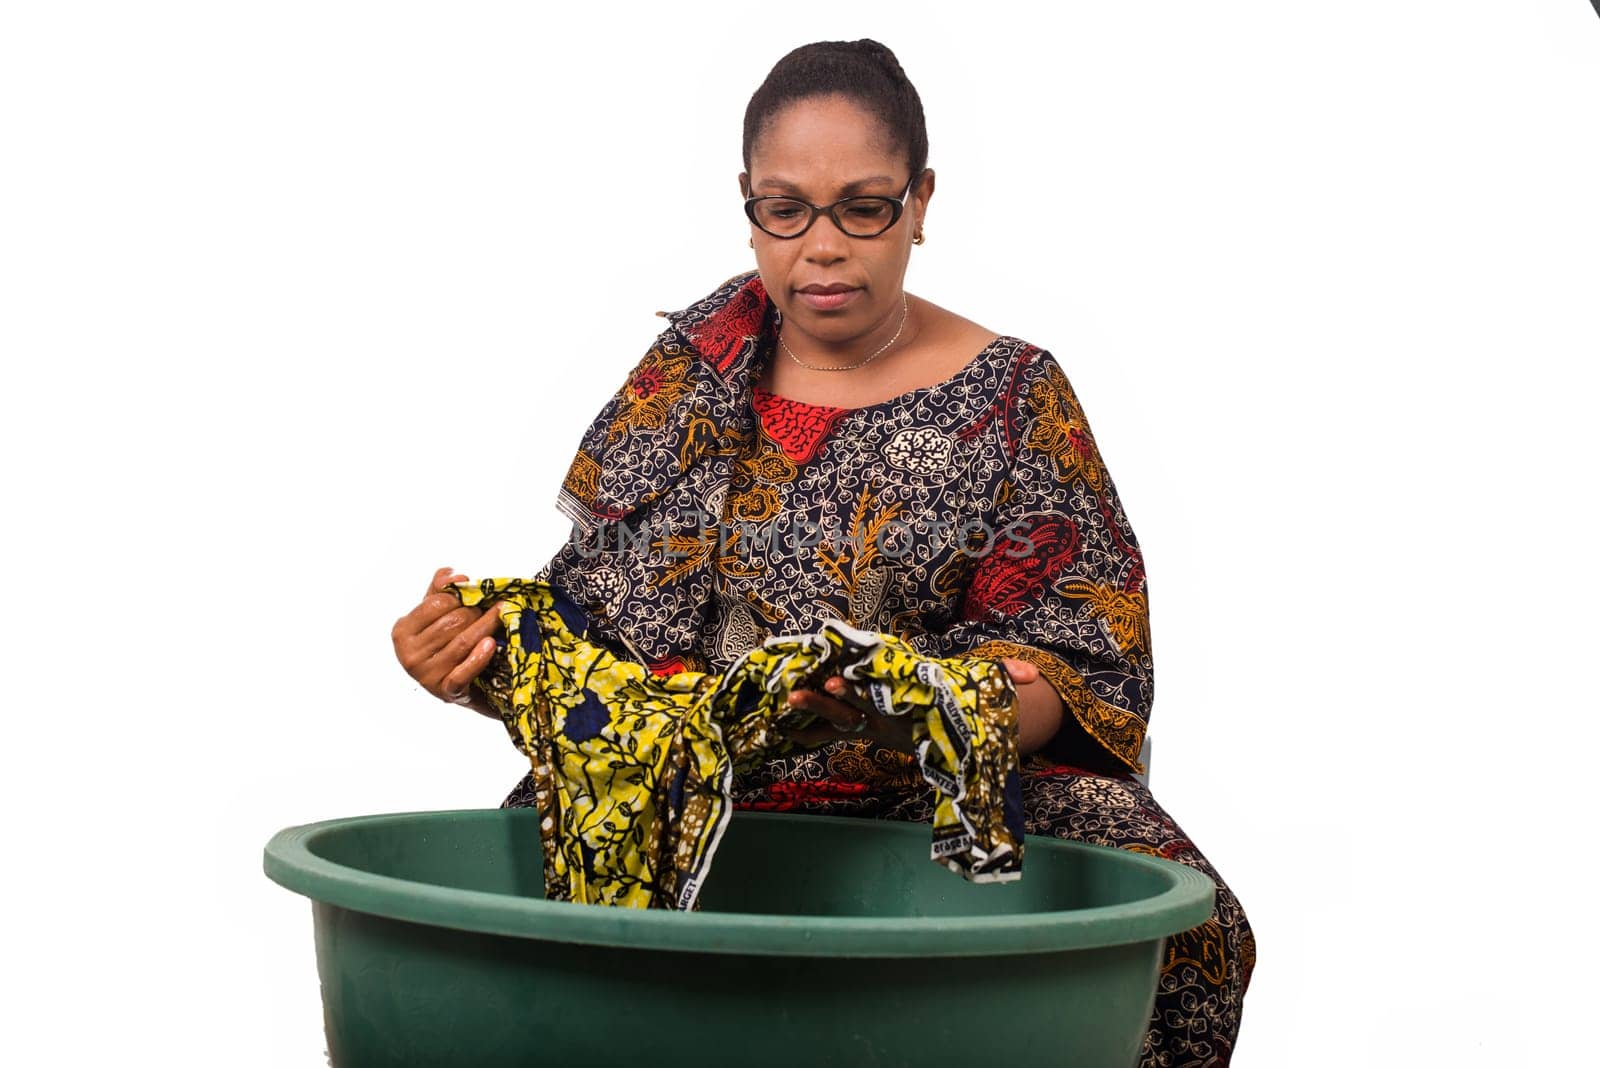 mature african woman in loincloth sitting doing laundry.